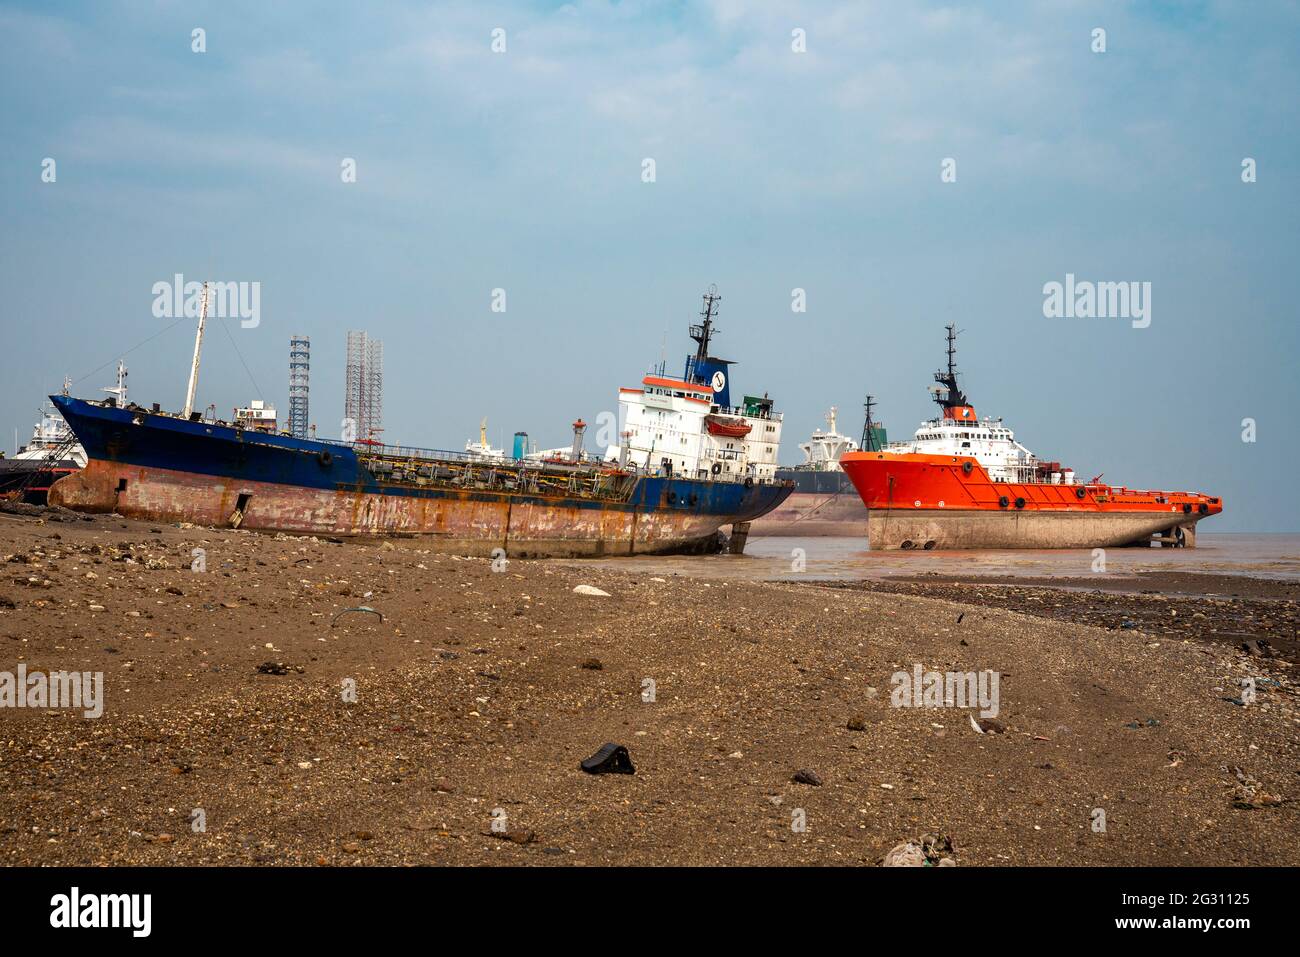 Alang ,01, February,2016: Different types  of ships and boats are brought to Alang Ship Breaking Yard for scrapping,Bhavnagar,Gujarat,India Stock Photo